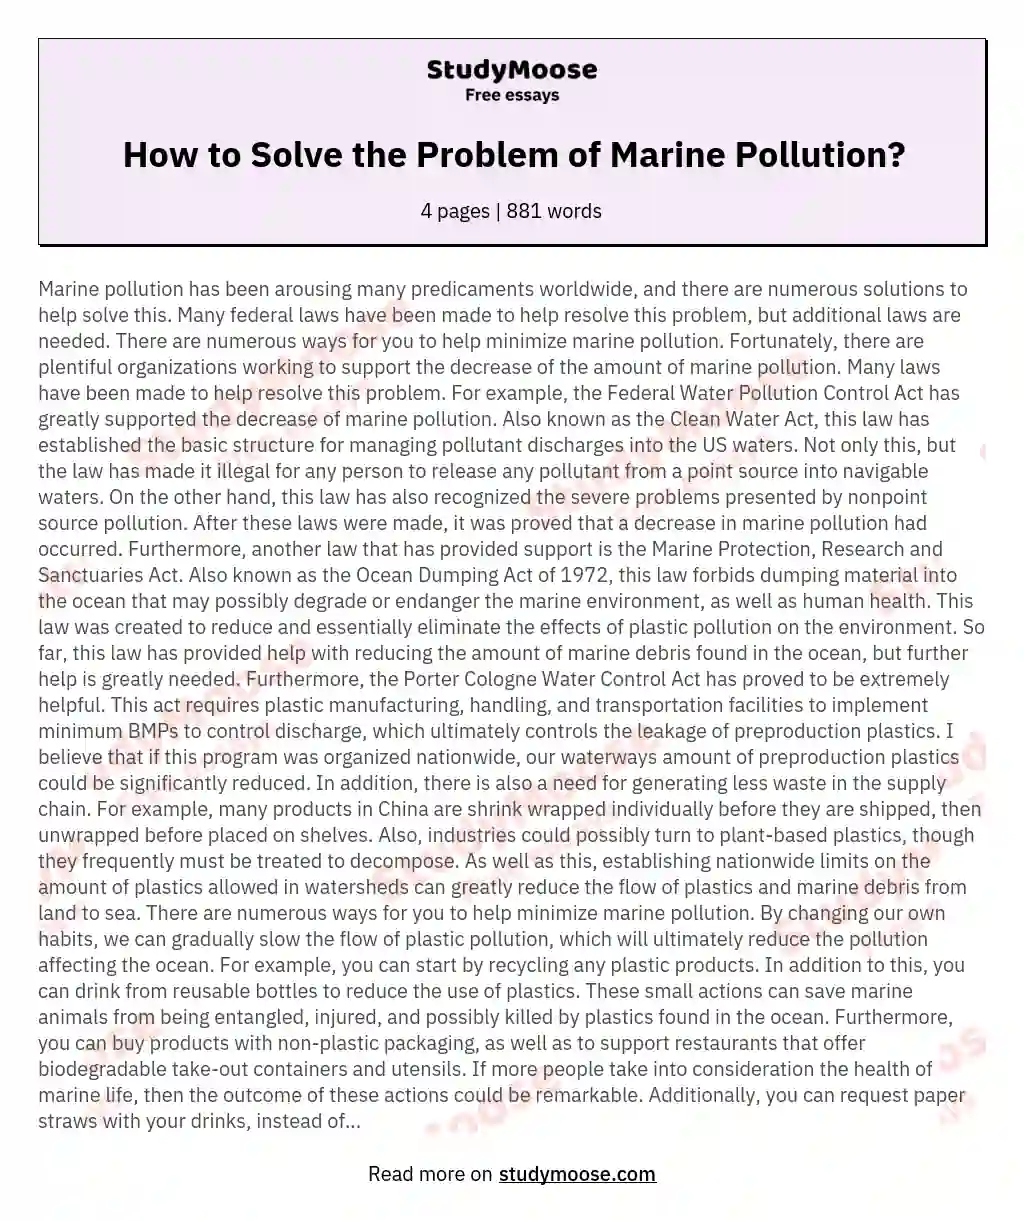 How to Solve the Problem of Marine Pollution?